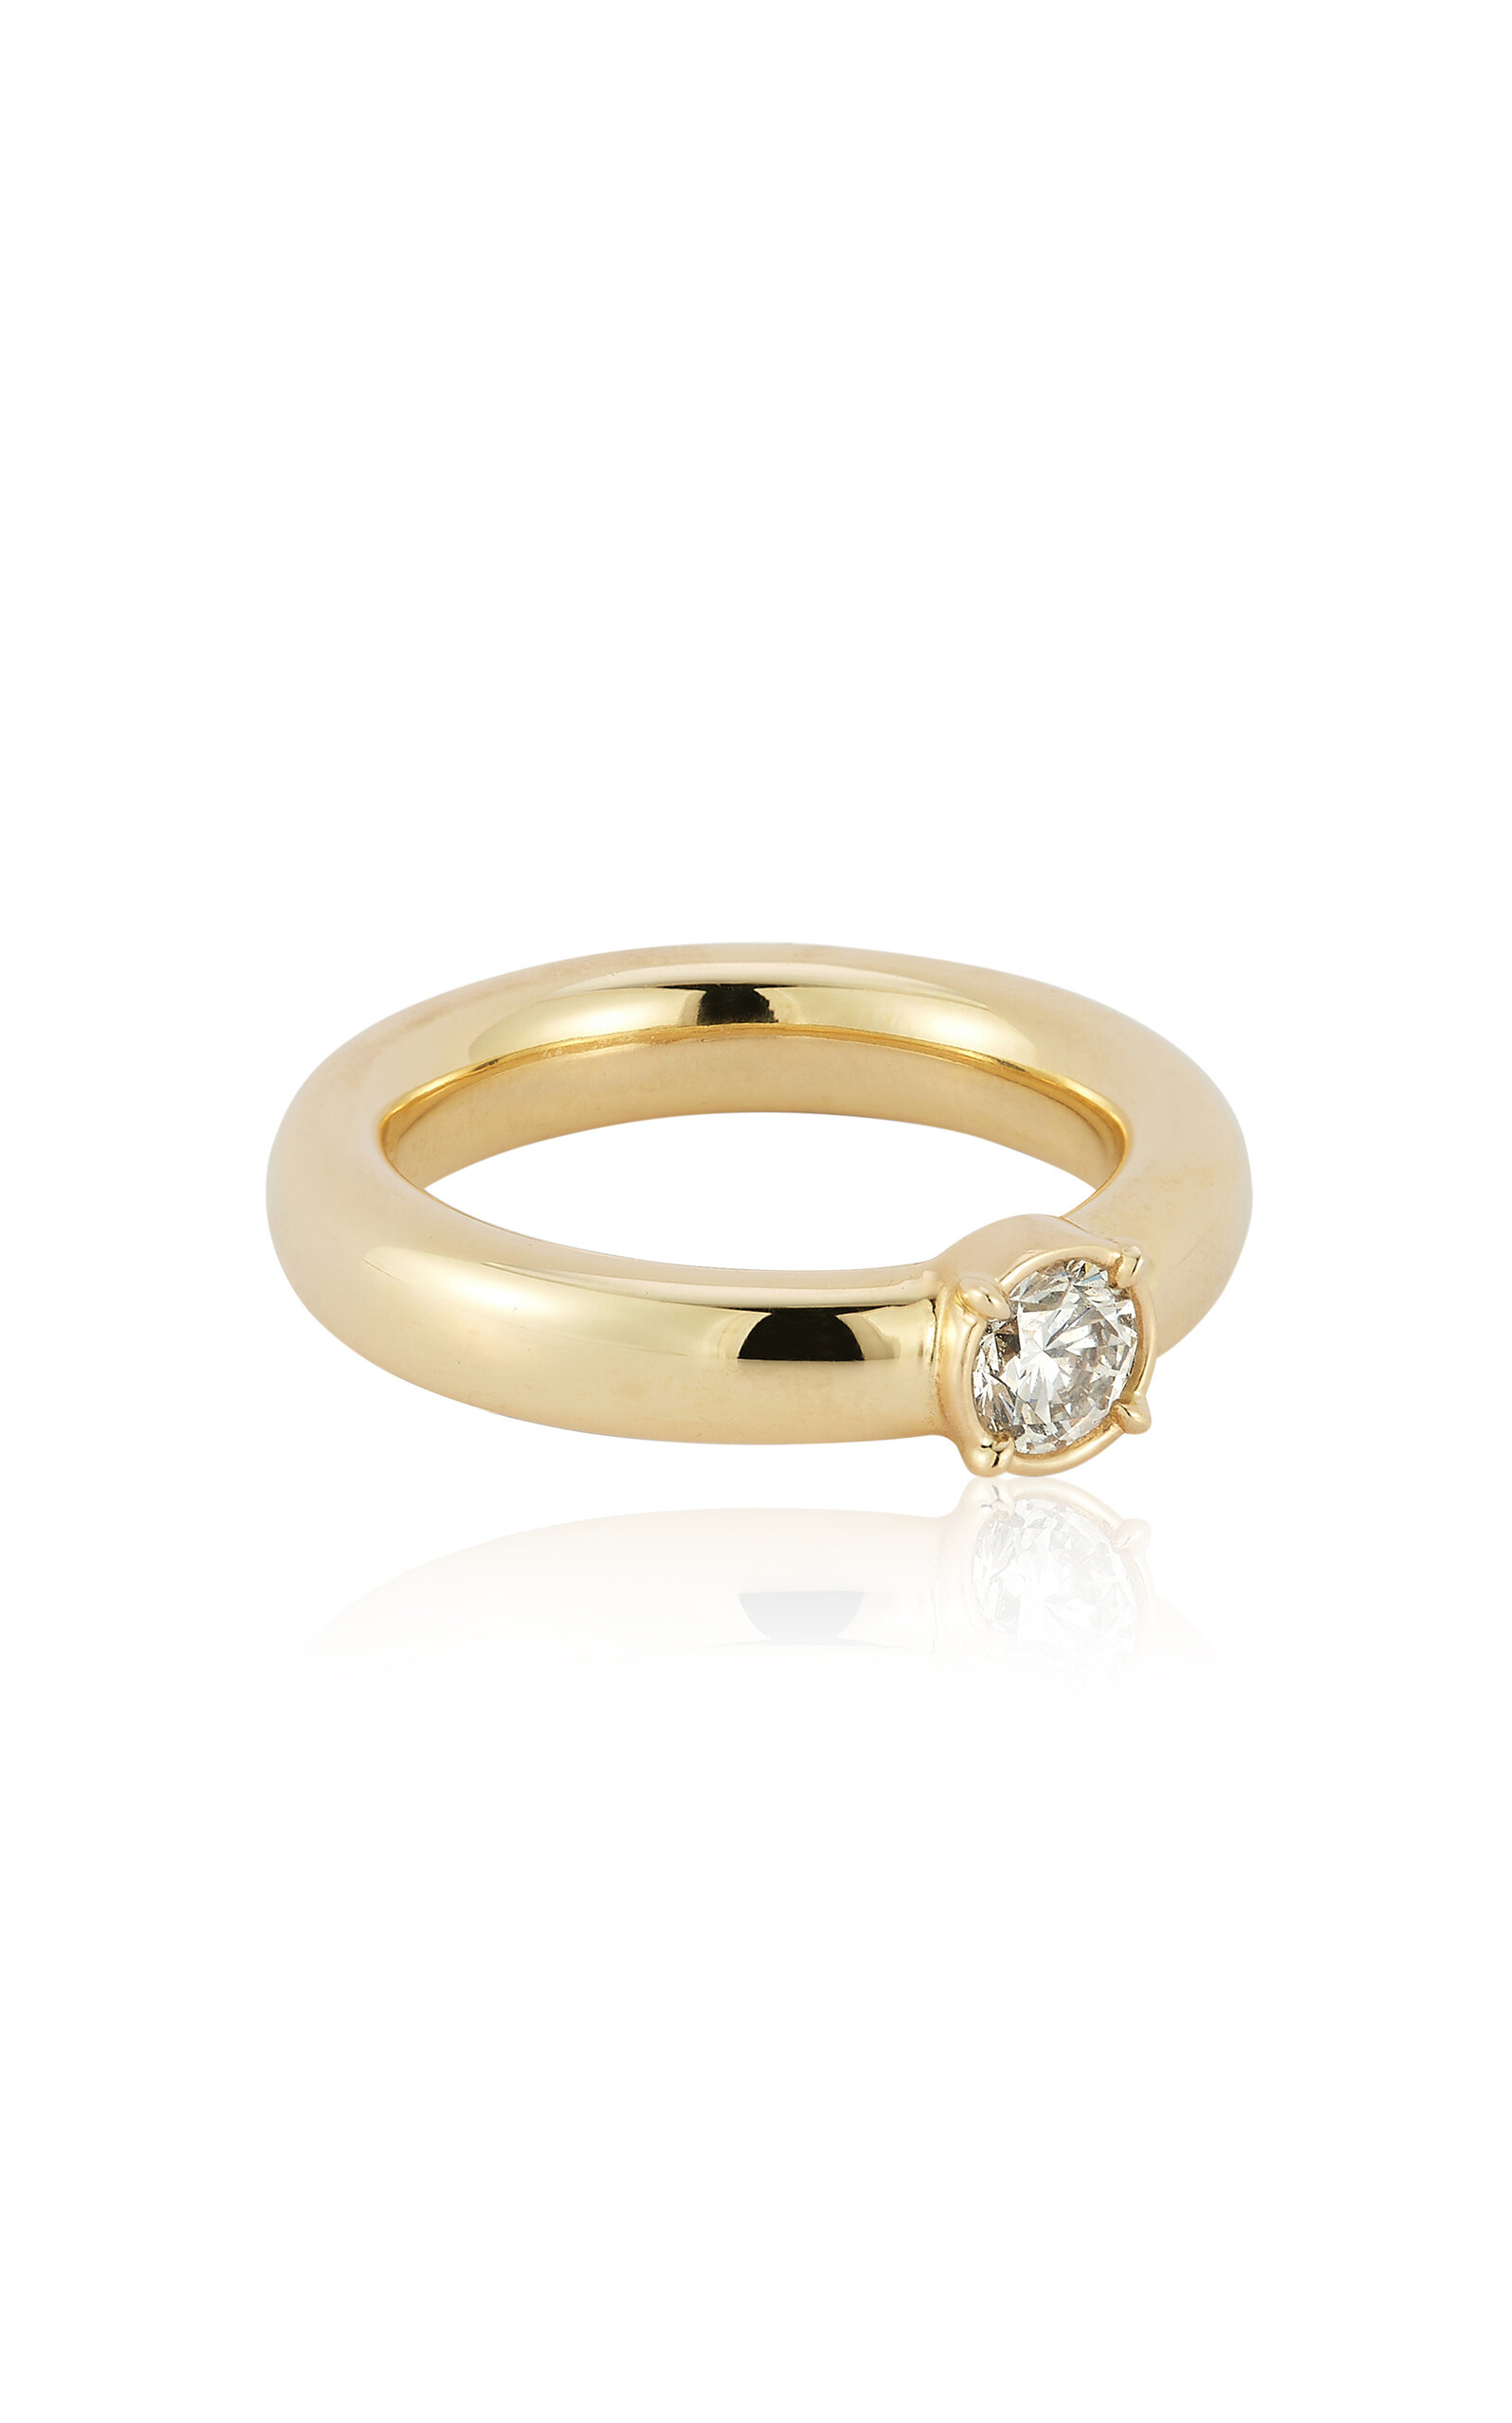 Shop Concept26 Signature 14k Yellow Gold Diamond Solitaire Ring